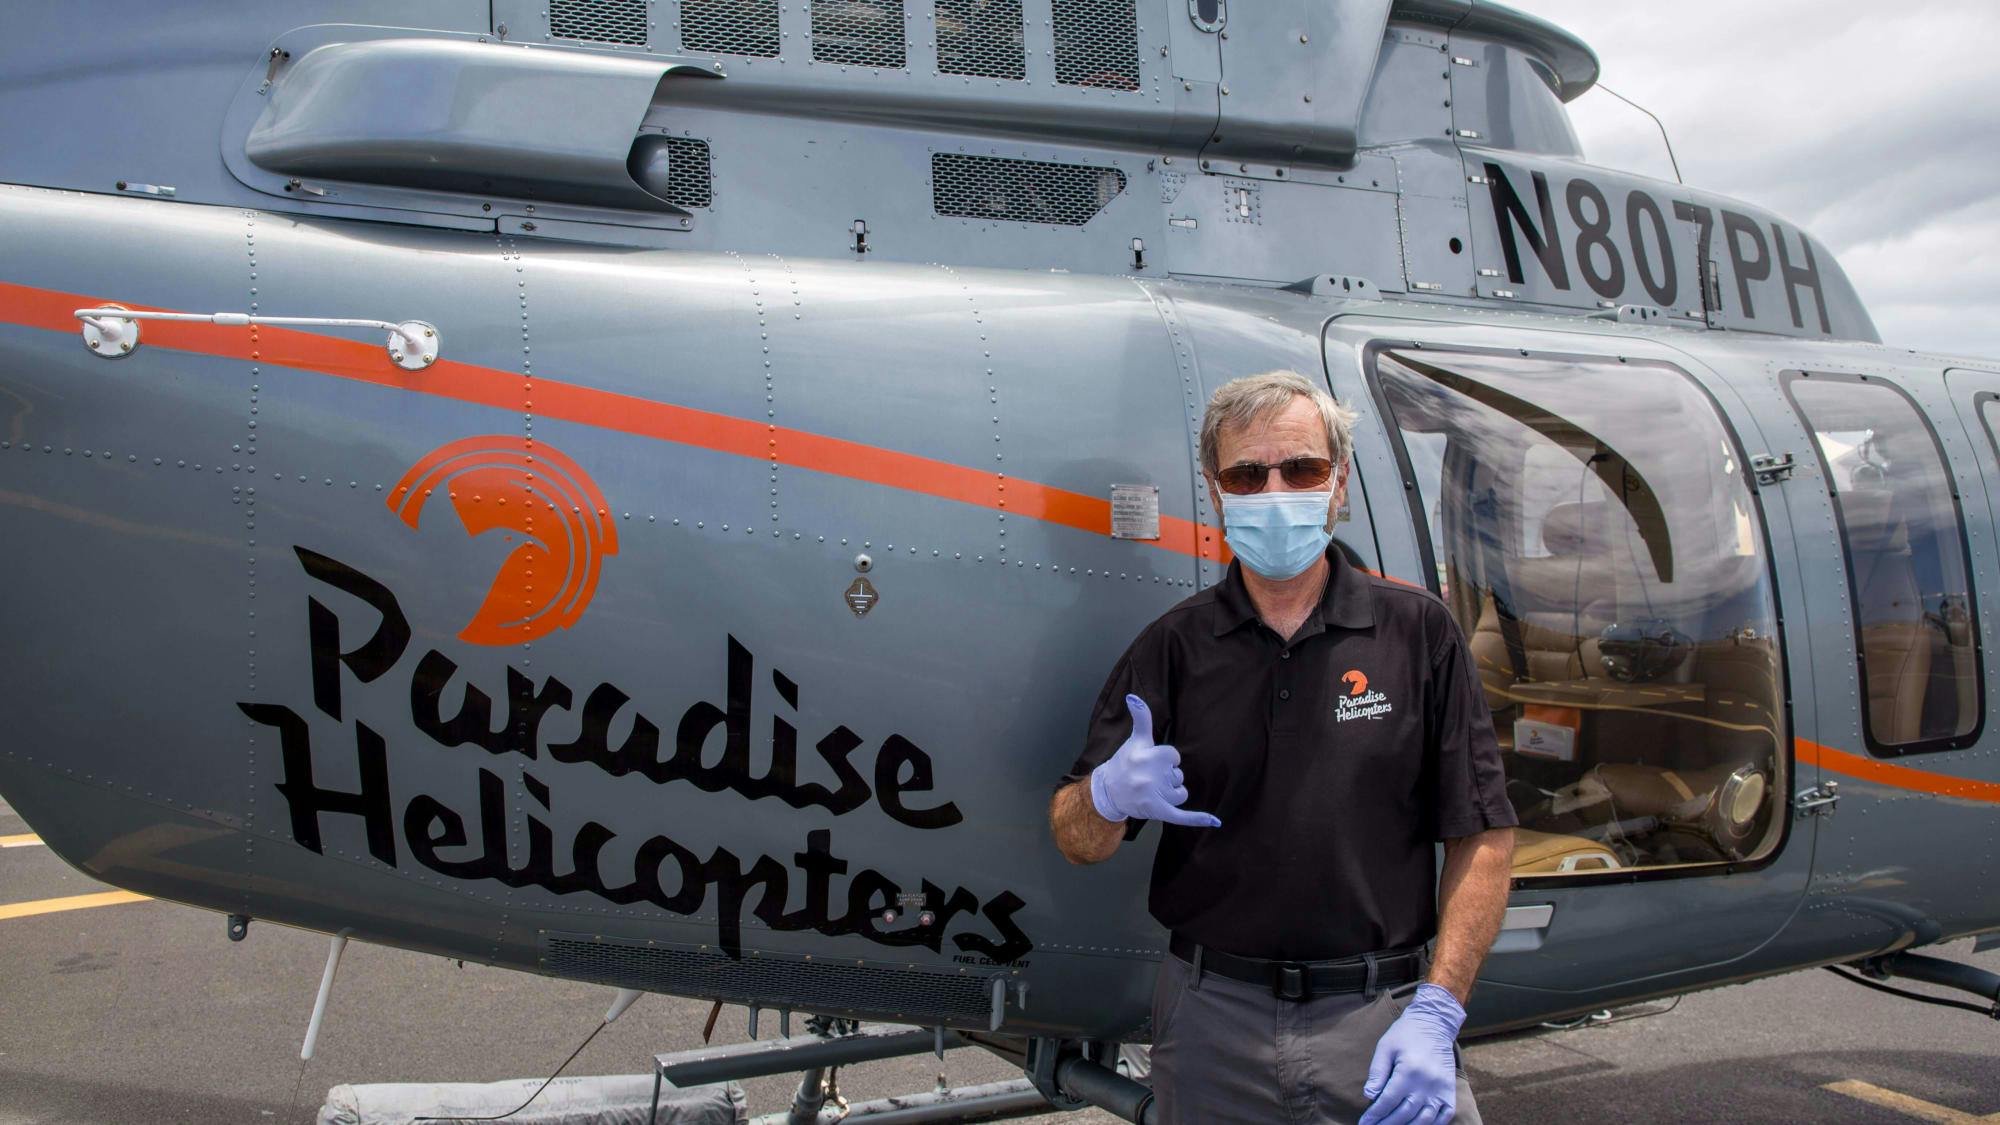 man doing the "hang loose" hand gesture wearing latex gloves and a surgical mask in front of a helicopter